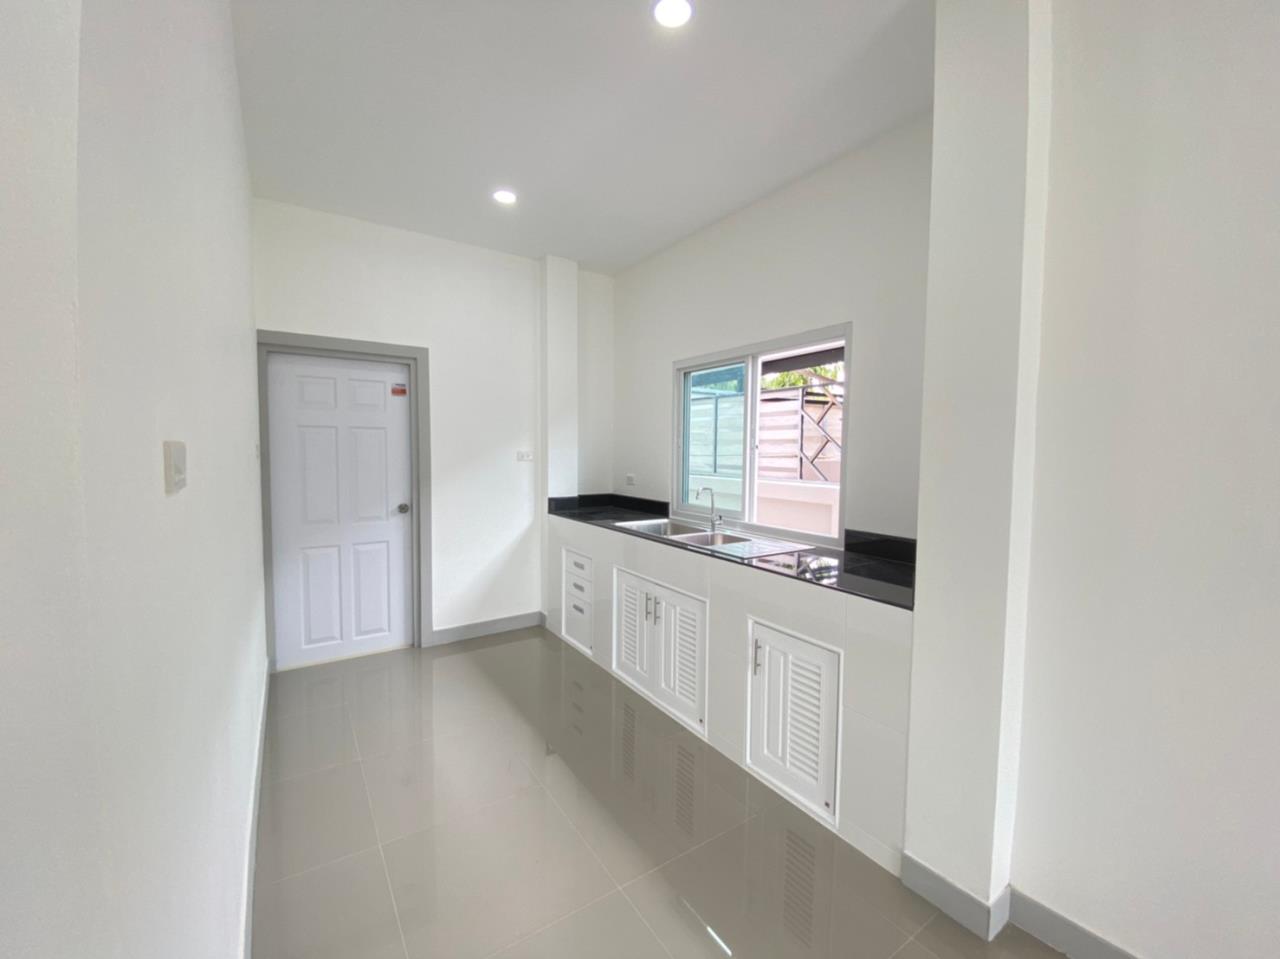 Thaiproperty1 Agency's New Single Storey House Project With Affordable Price - Hua Hin 7